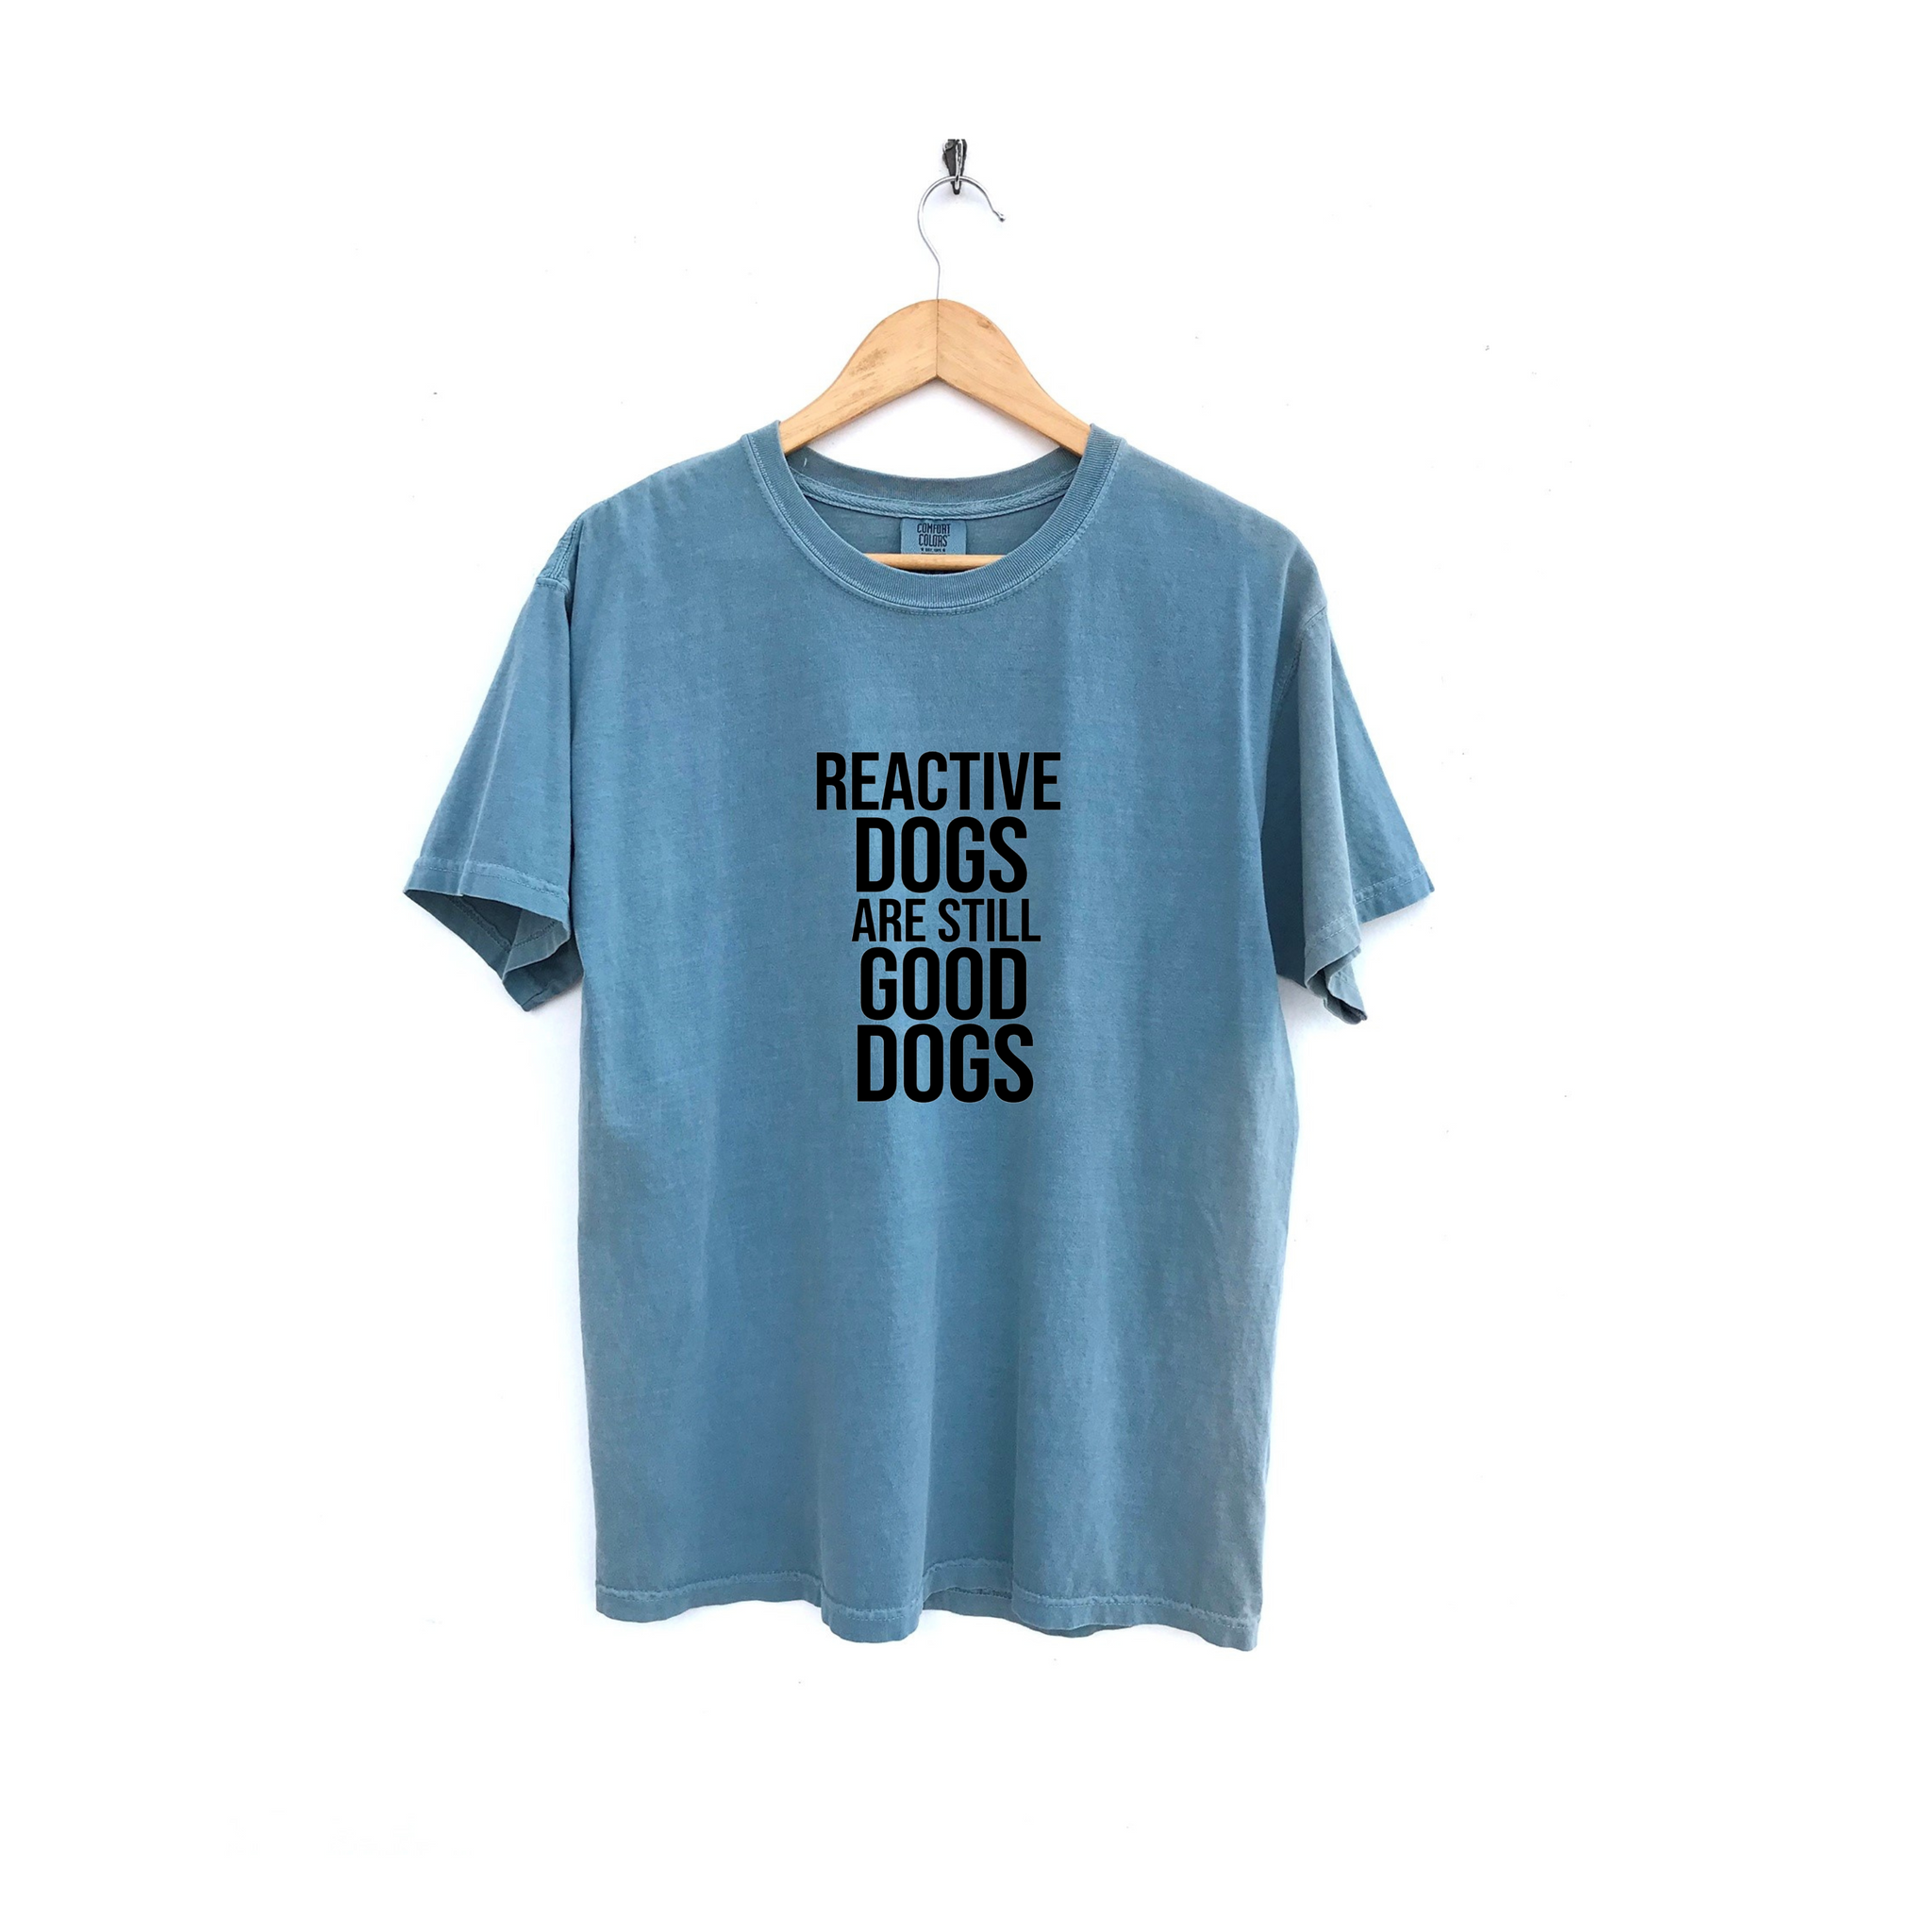 Reactive Dogs Are Still Good Dogs Shirt